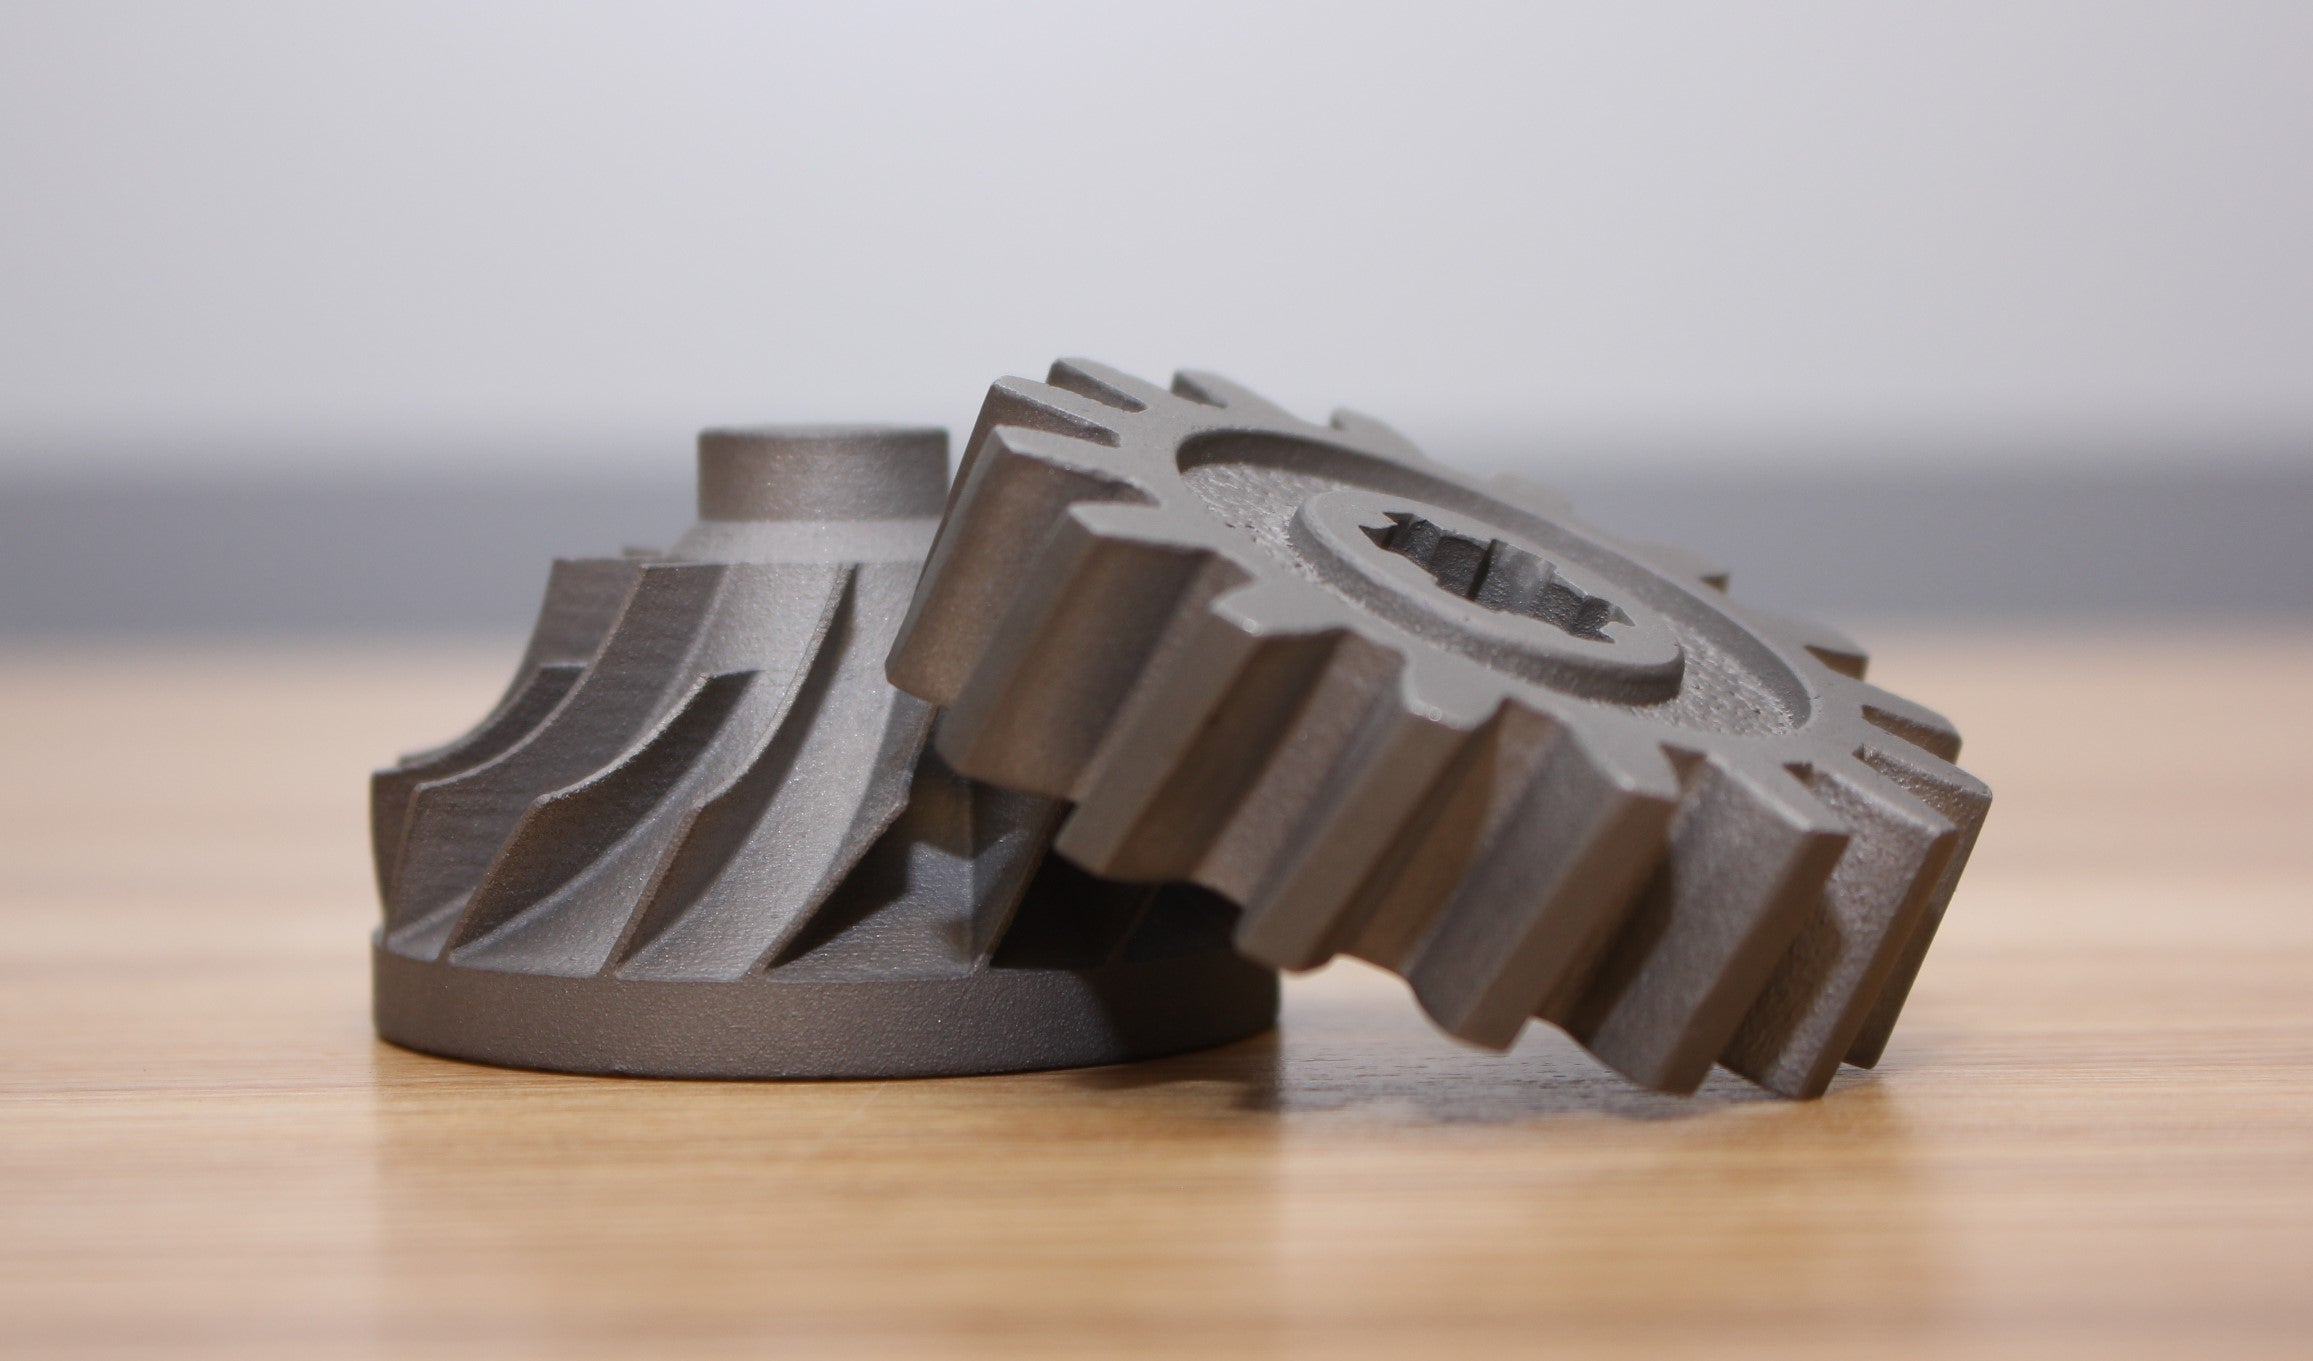 Advanced additive manufacturing technology enables the production of custom metal gears and other parts.